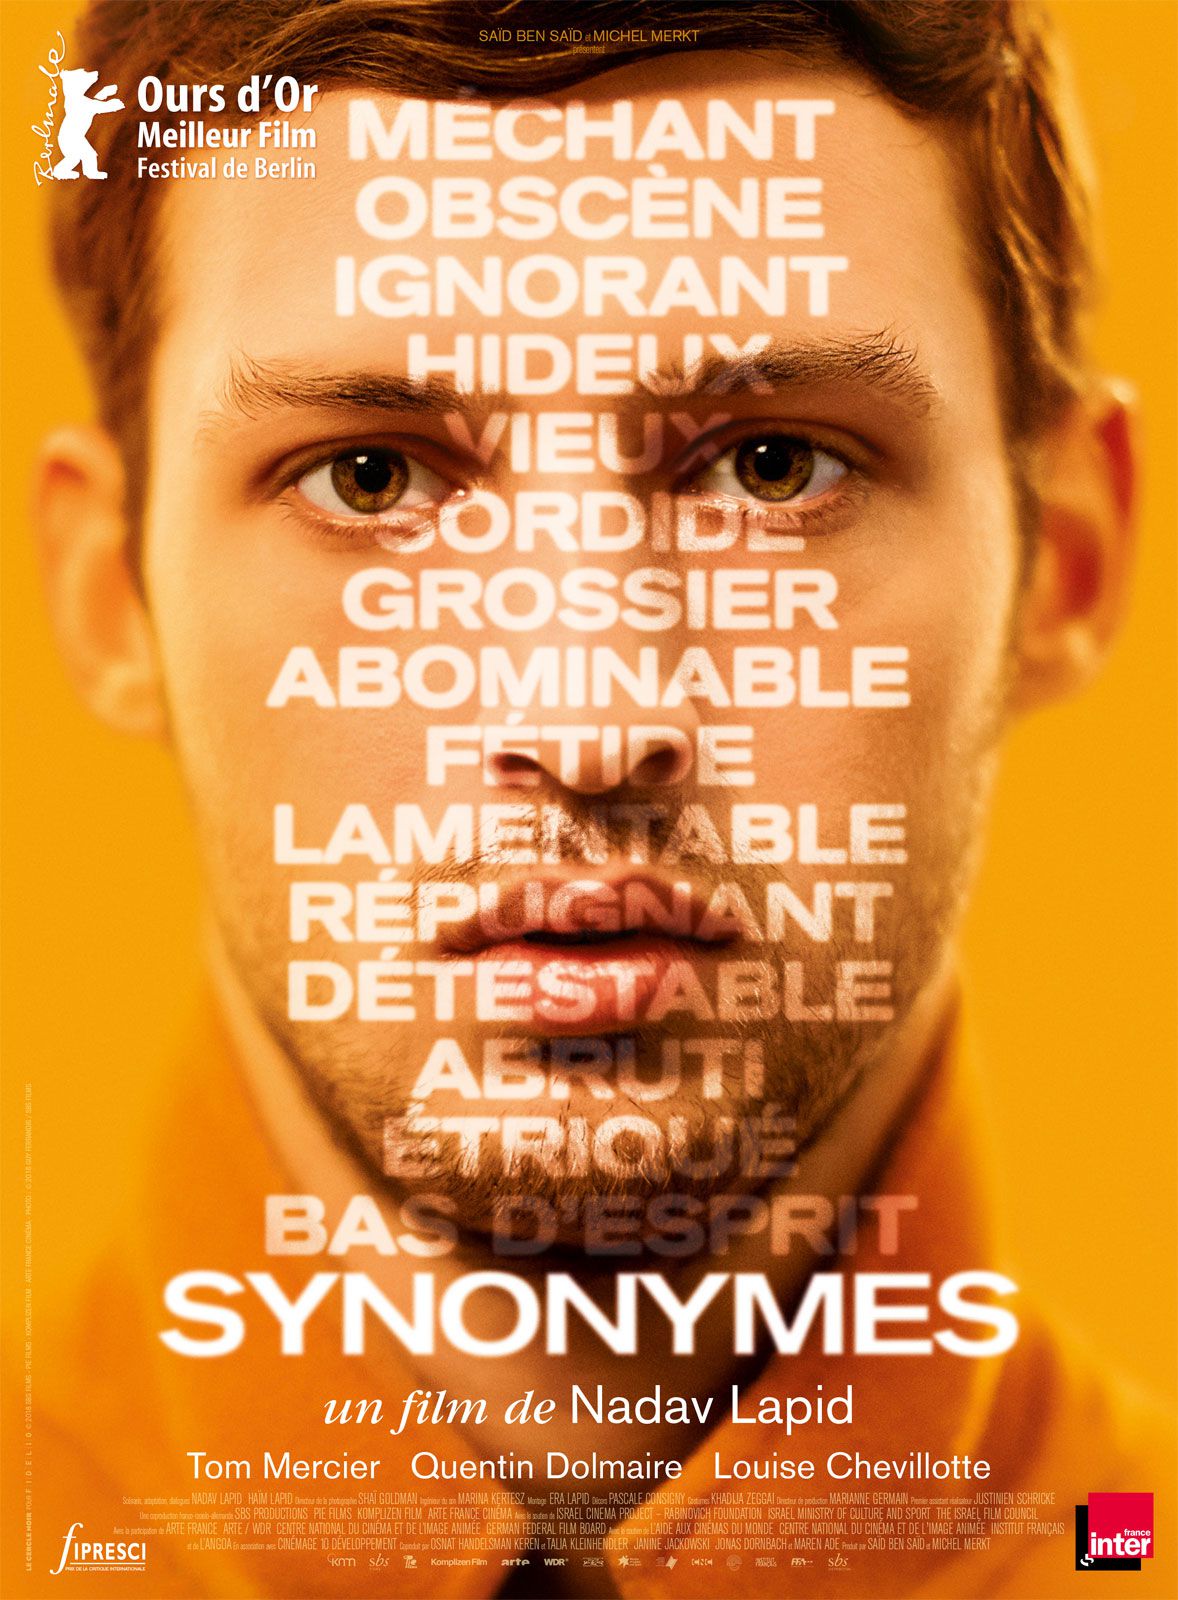 Synonymes - Film (2019) streaming VF gratuit complet